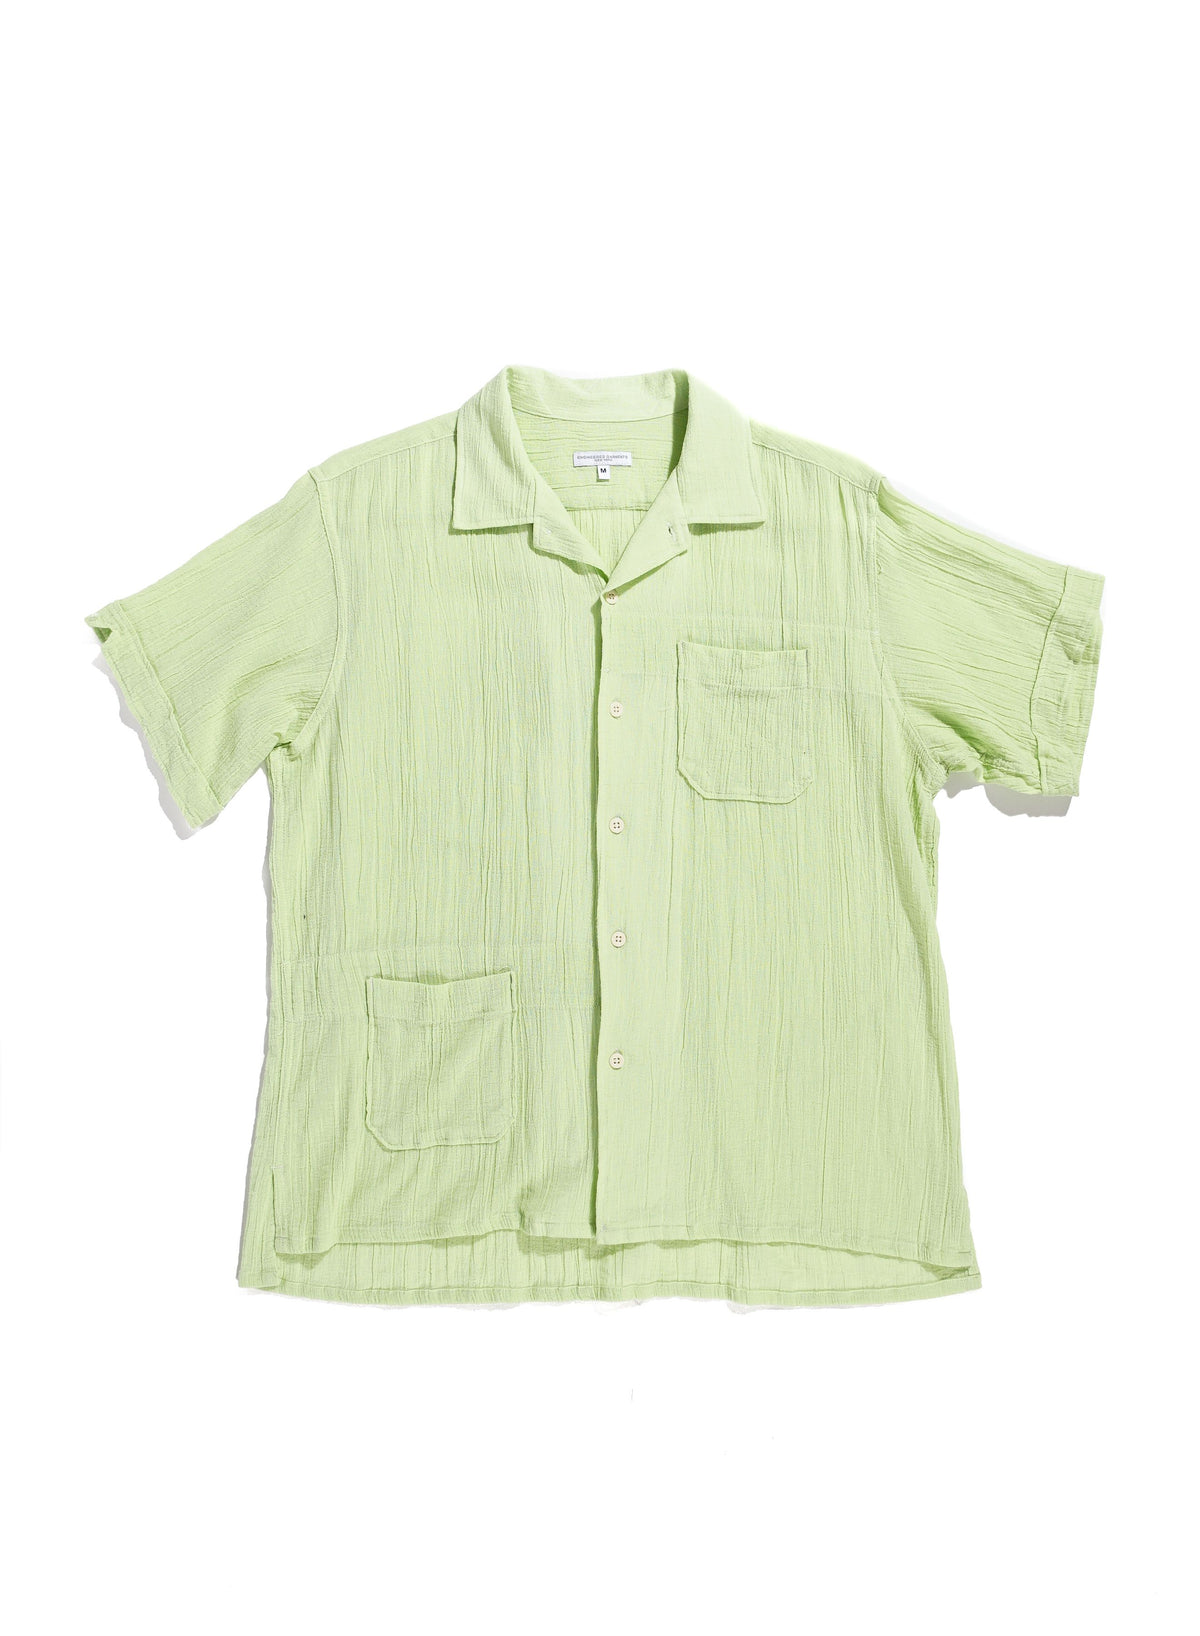 Camp Shirt in Lime Cotton Crepe